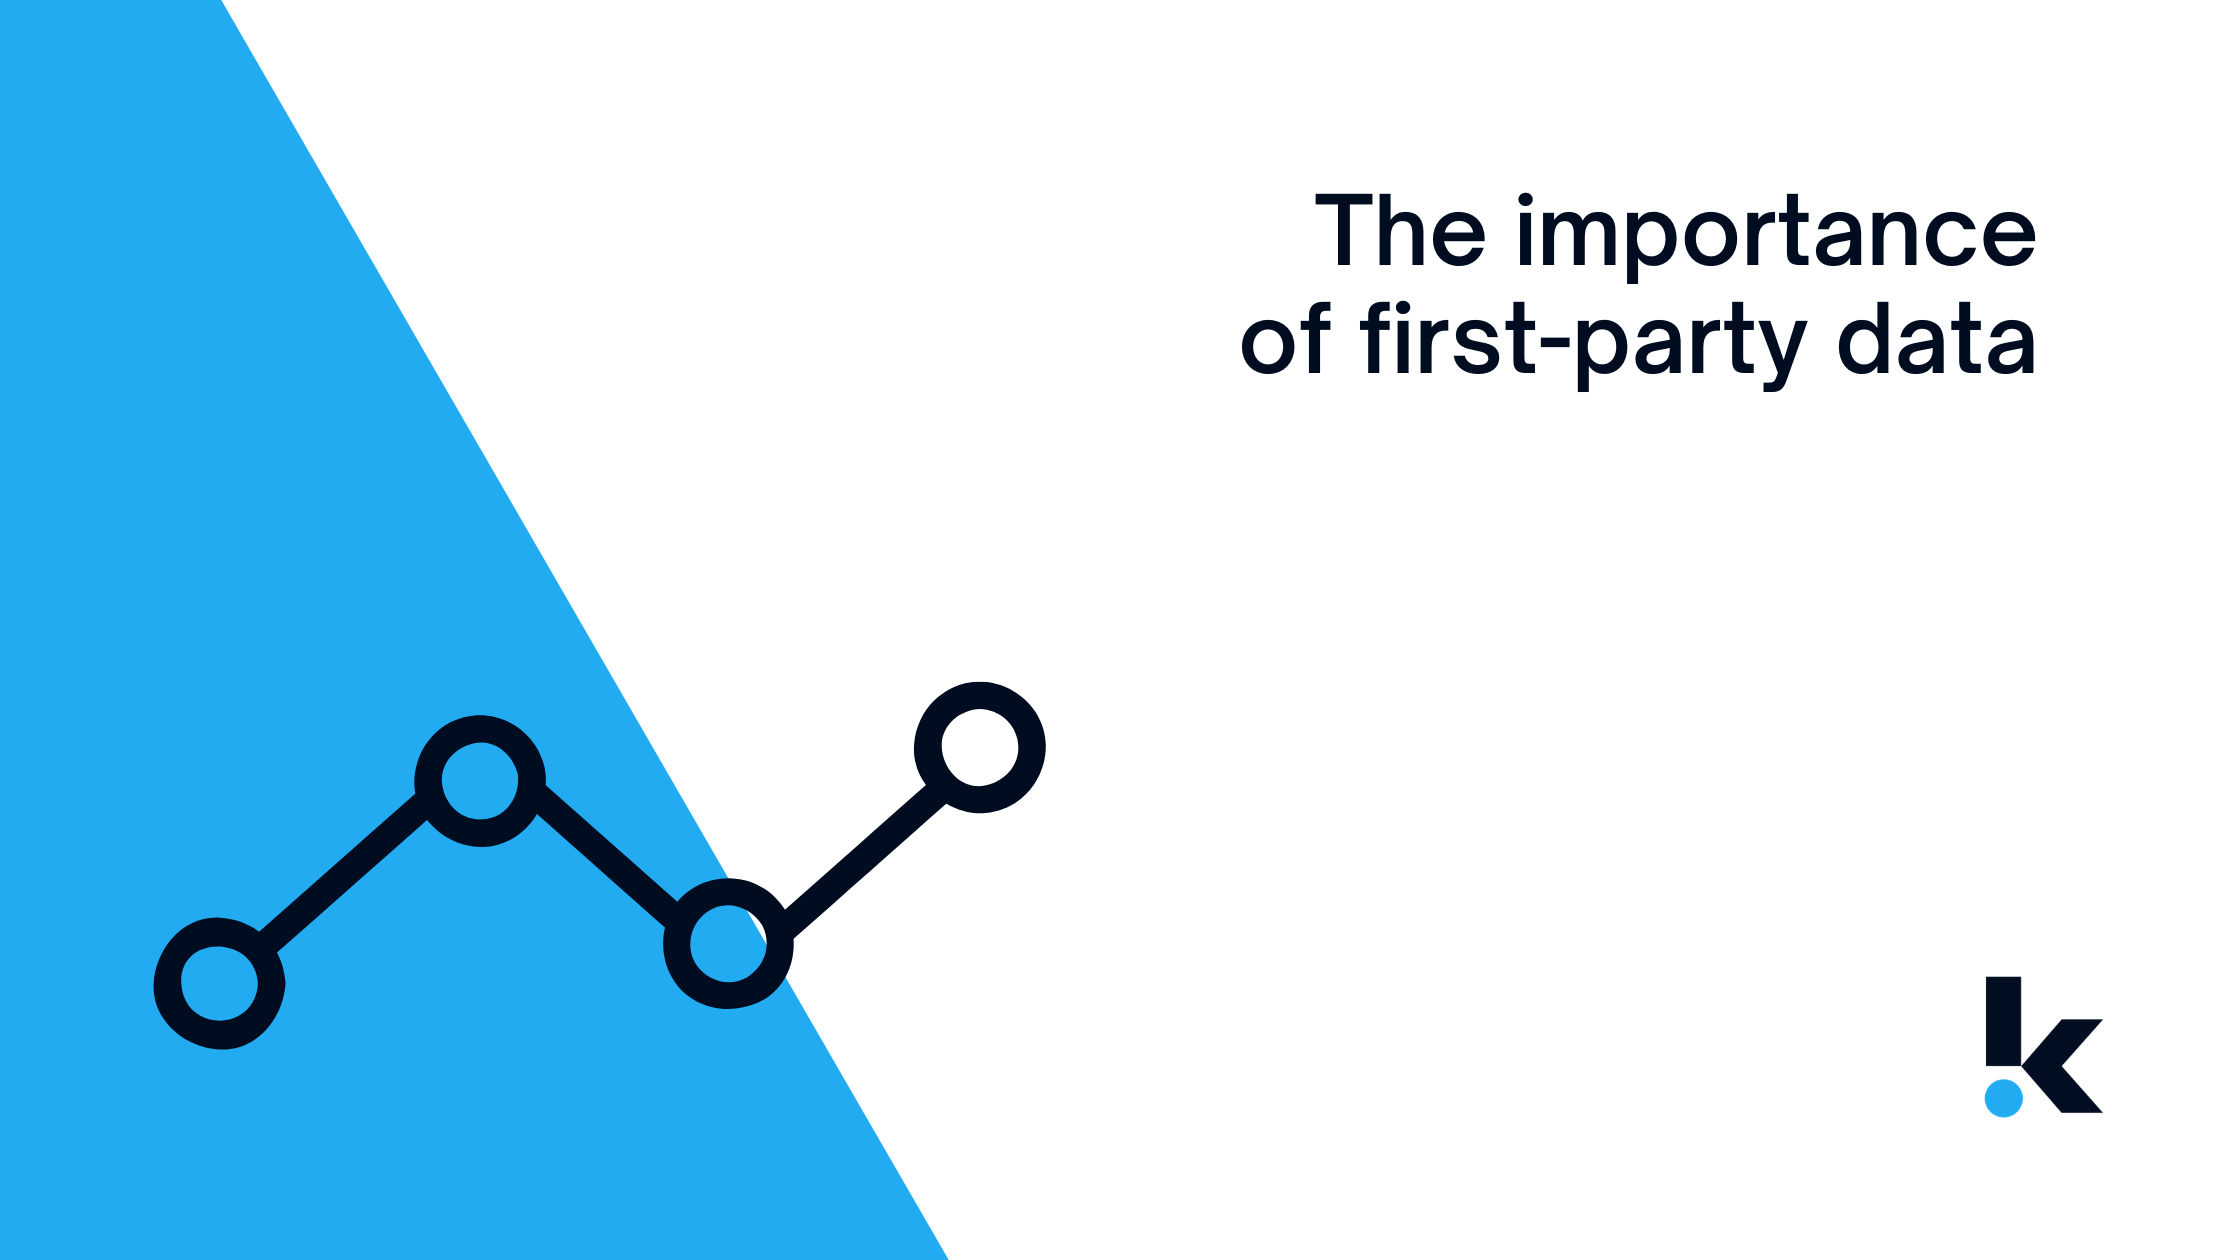 The importance of first-party data